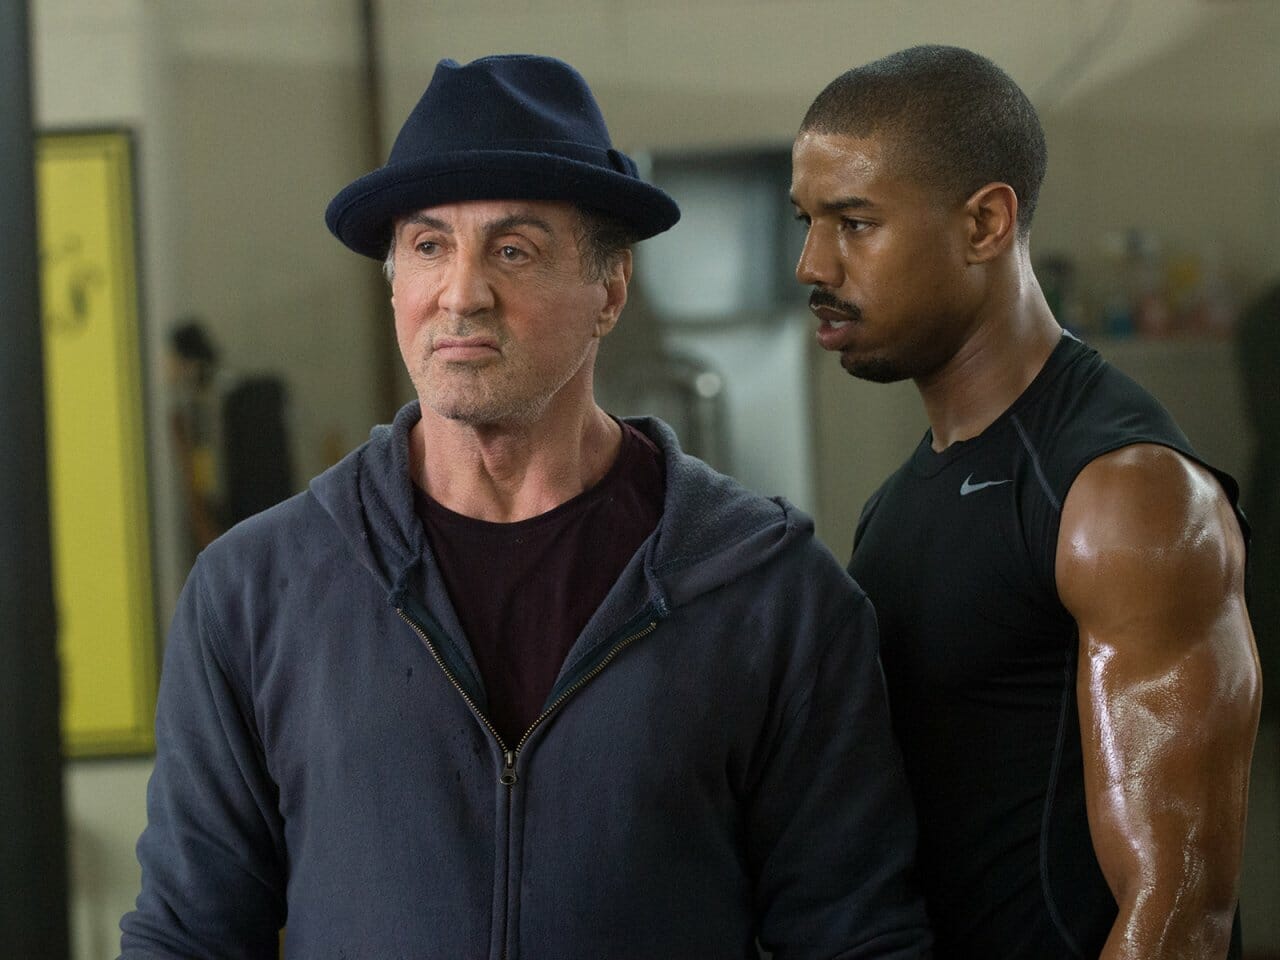 Sylvester Stallone tacle Creed III et donne des news sur Rocky VII